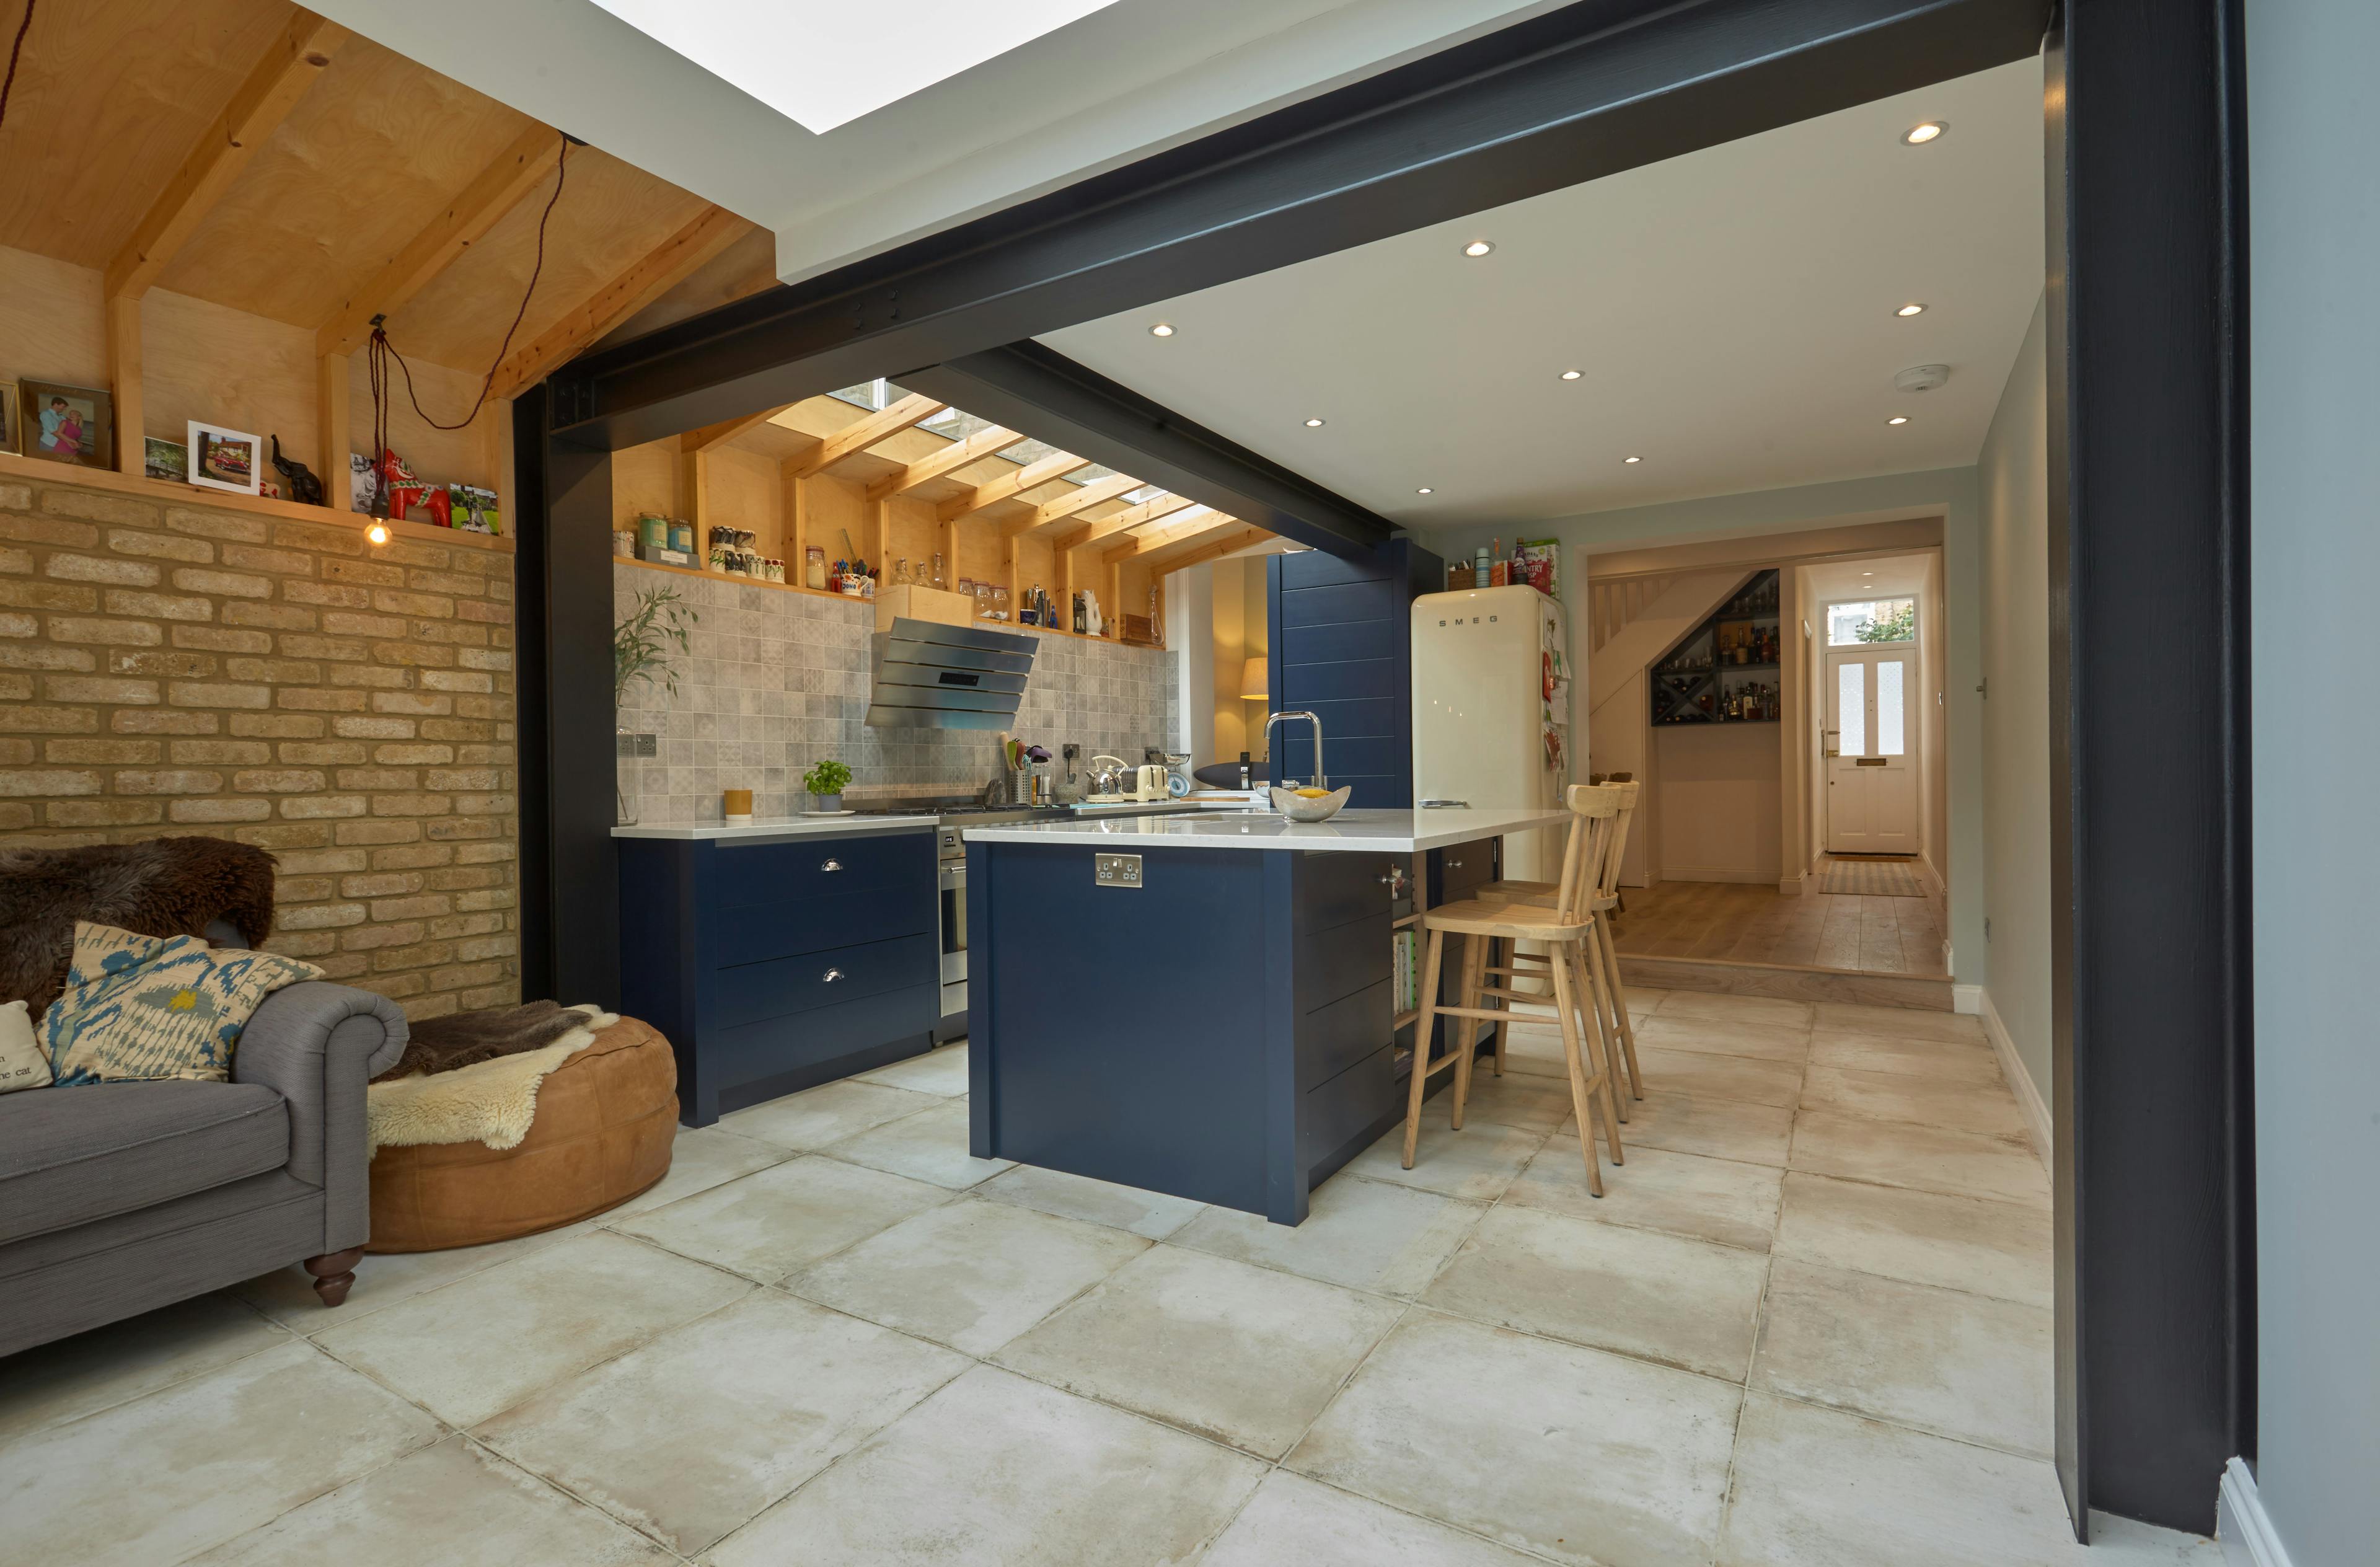 House extension and kitchen redesign